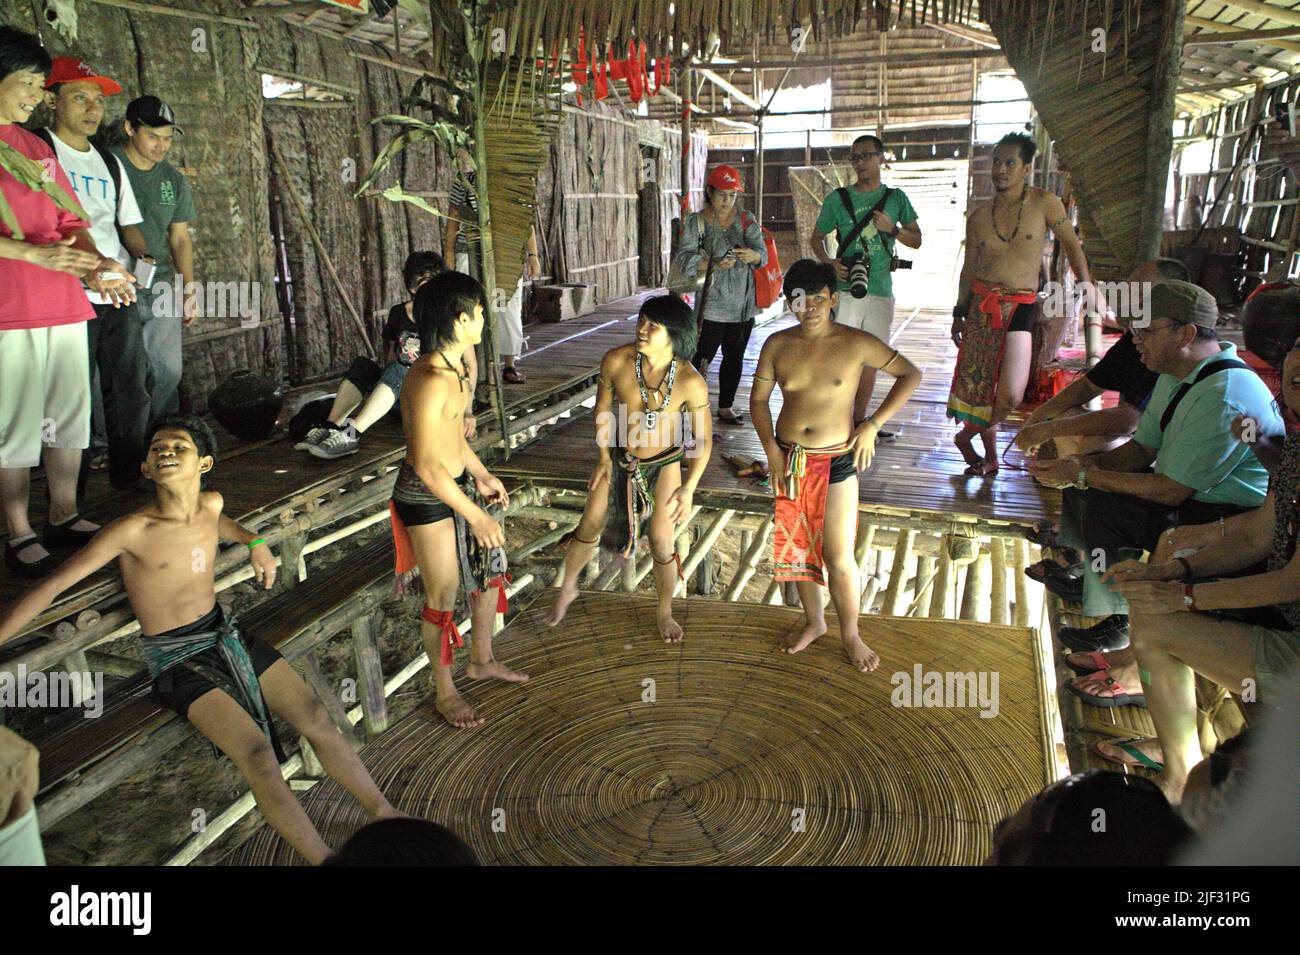 Tourism workers wearing indigenous attires showing a round trampoline made of rattan at Mari Mari Cultural Village, a village that is designed to showcase the cultures of five ethnic groups of Sabah—a Malaysian state in North Borneo, which is located on the outskirts of Kota Kinabalu in Sabah, Malaysia. Stock Photo